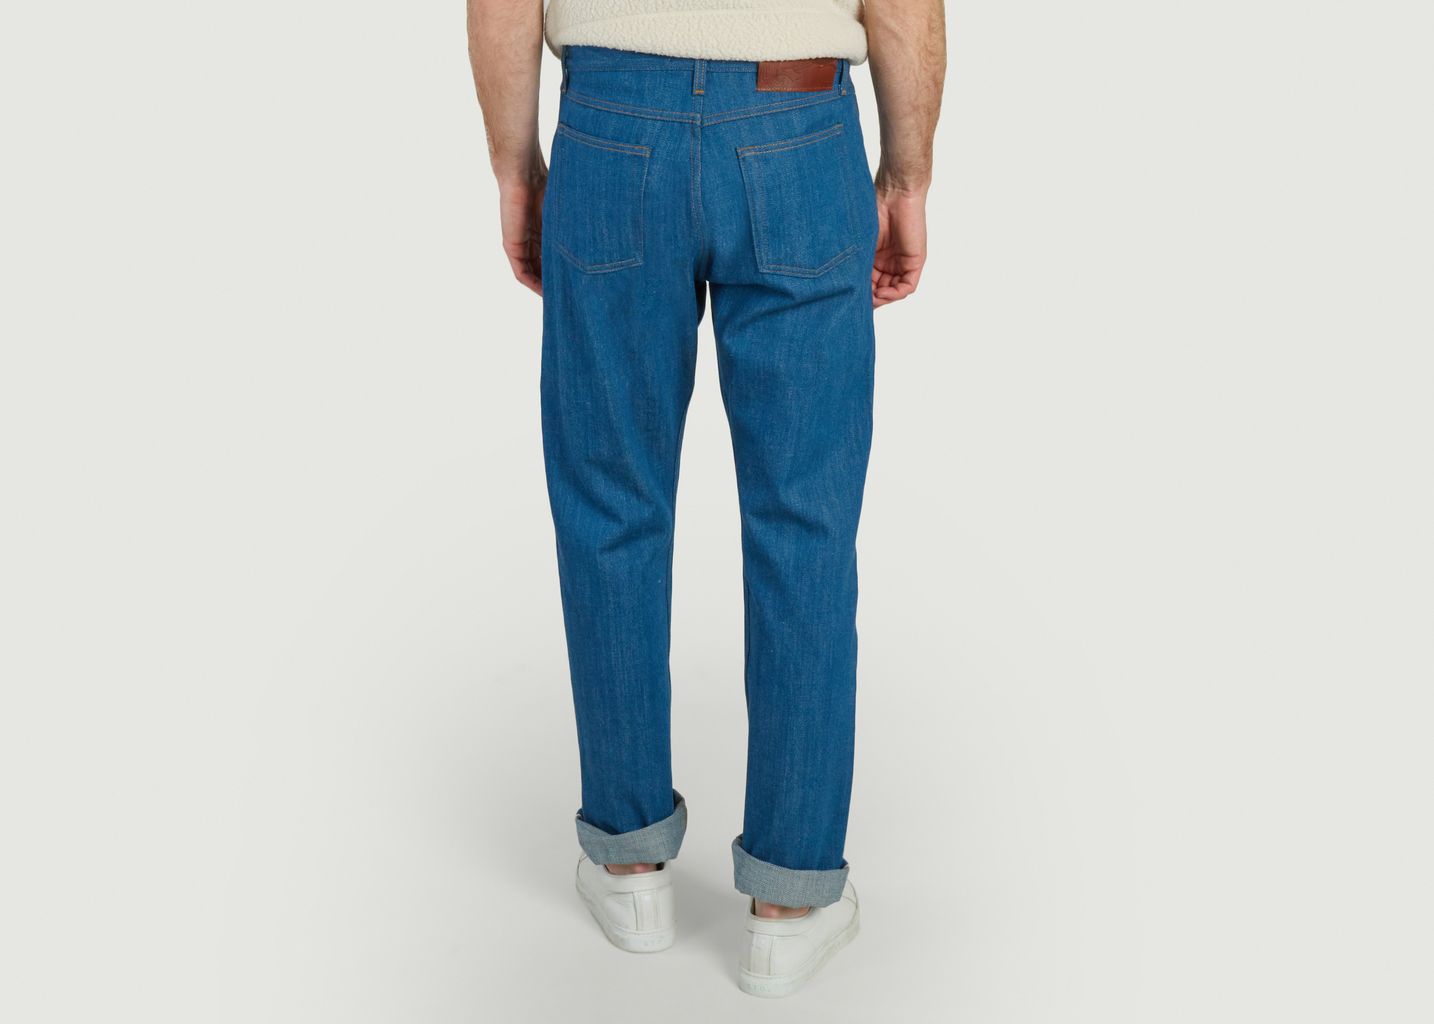 True Guy Oceans Edge Selvedge Jeans - Naked and Famous